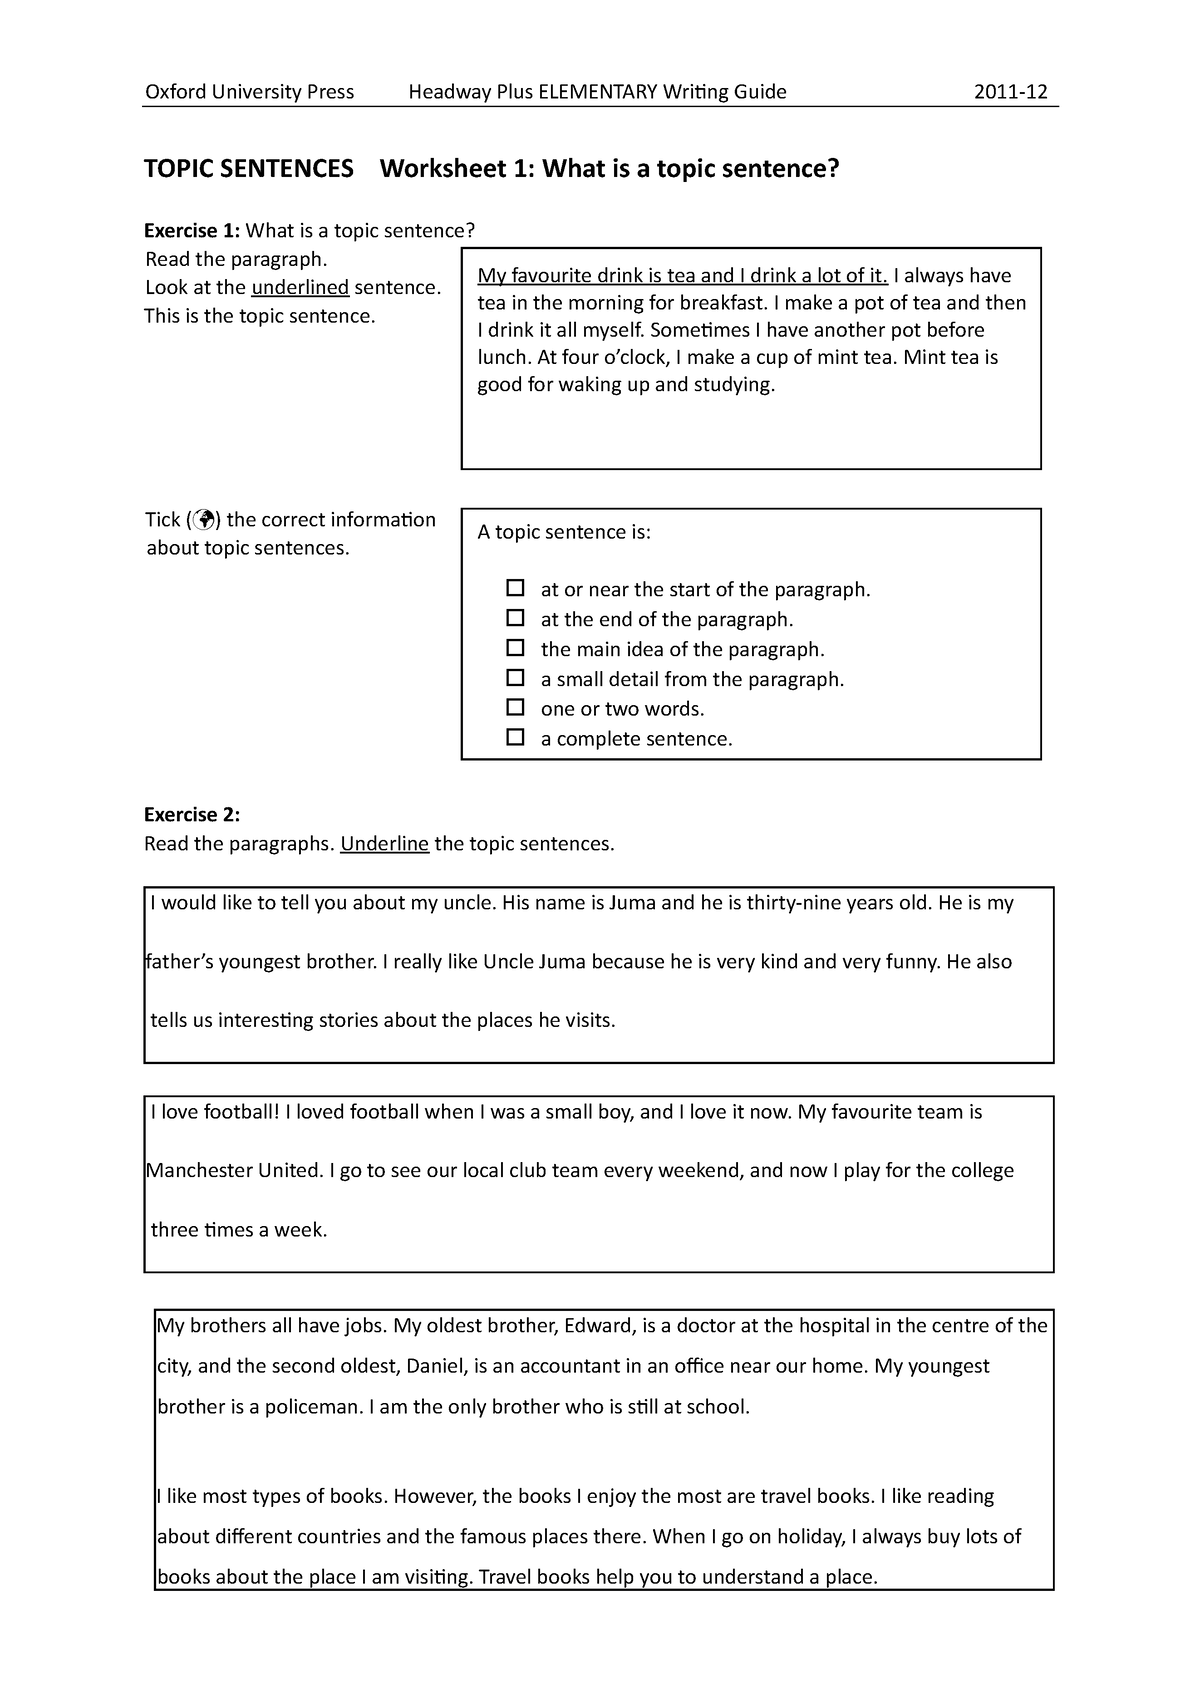 topic-sentences-2-word-topic-sentences-worksheet-1-what-is-a-topic